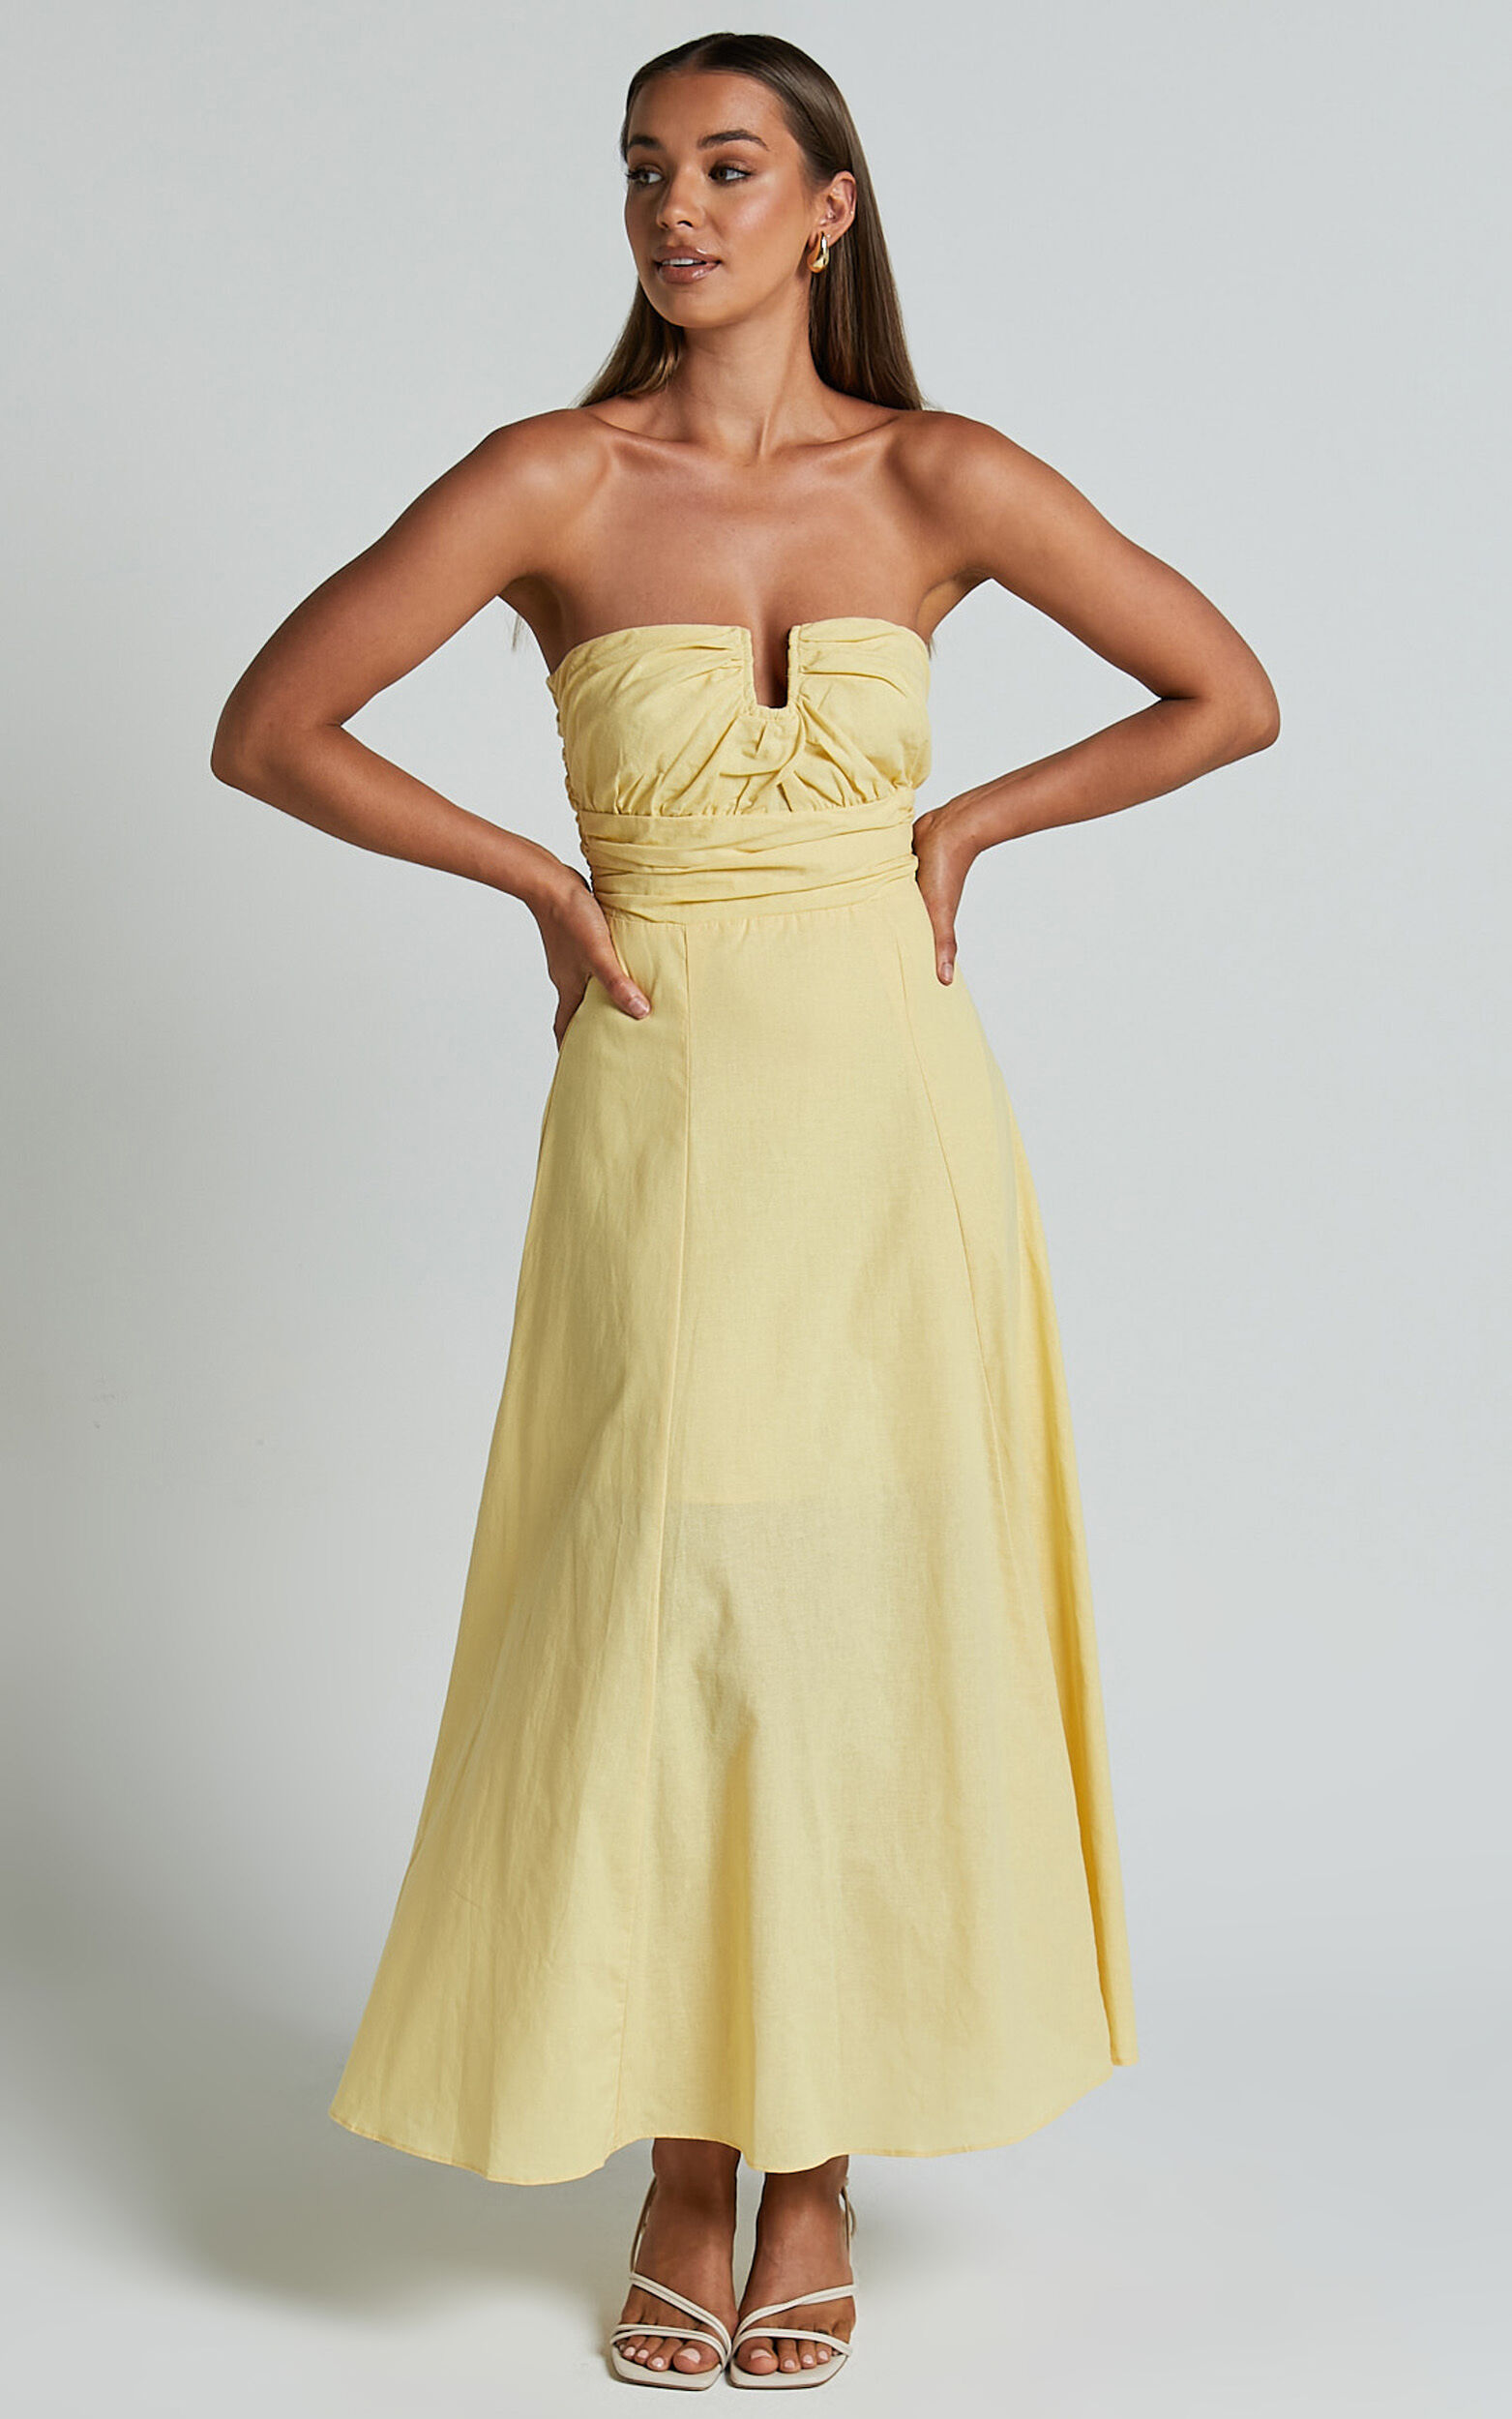 Rhiamay Midi Dress - Strapless Cut Out Front Fit and Flare Dress in Yellow - 06, YEL1